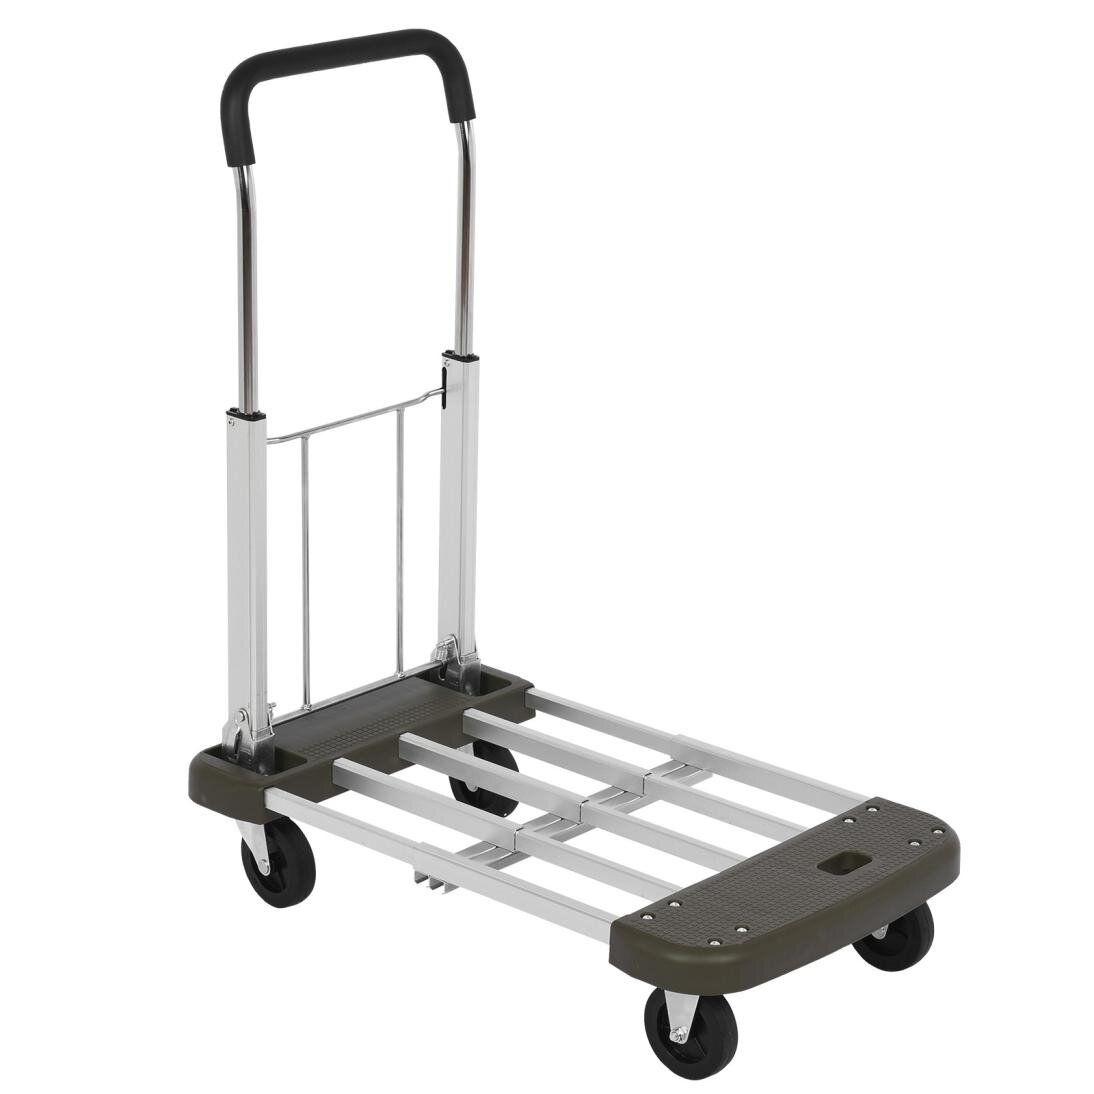 LUCKYREMORE KM34289 330 Lb. Capacity Foldable Hand Truck Dolly